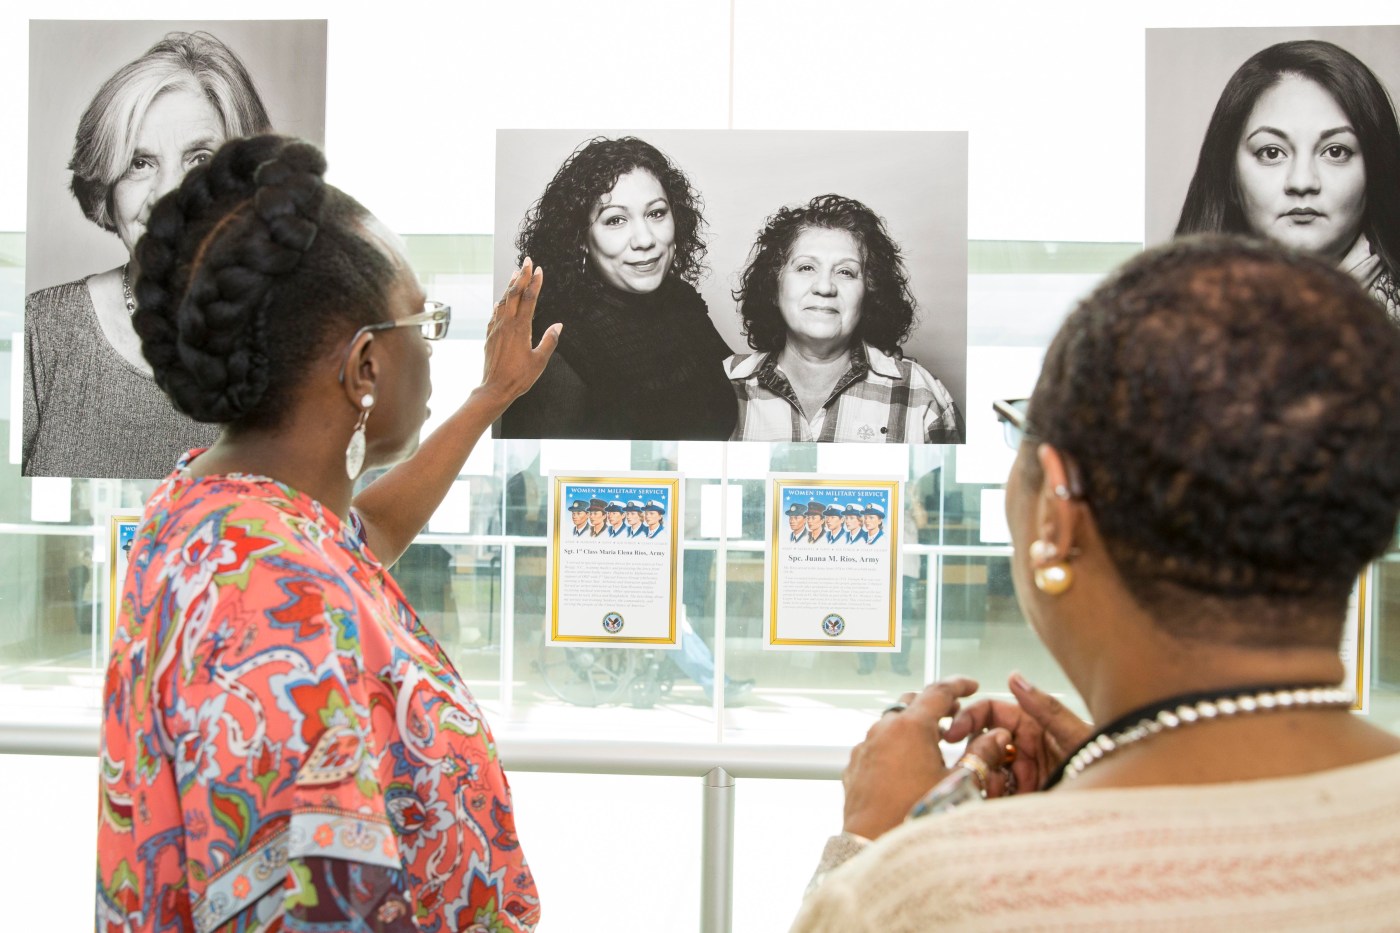 Guests admire and discuss one of the 28 portraits on display as part of the photo exhibit